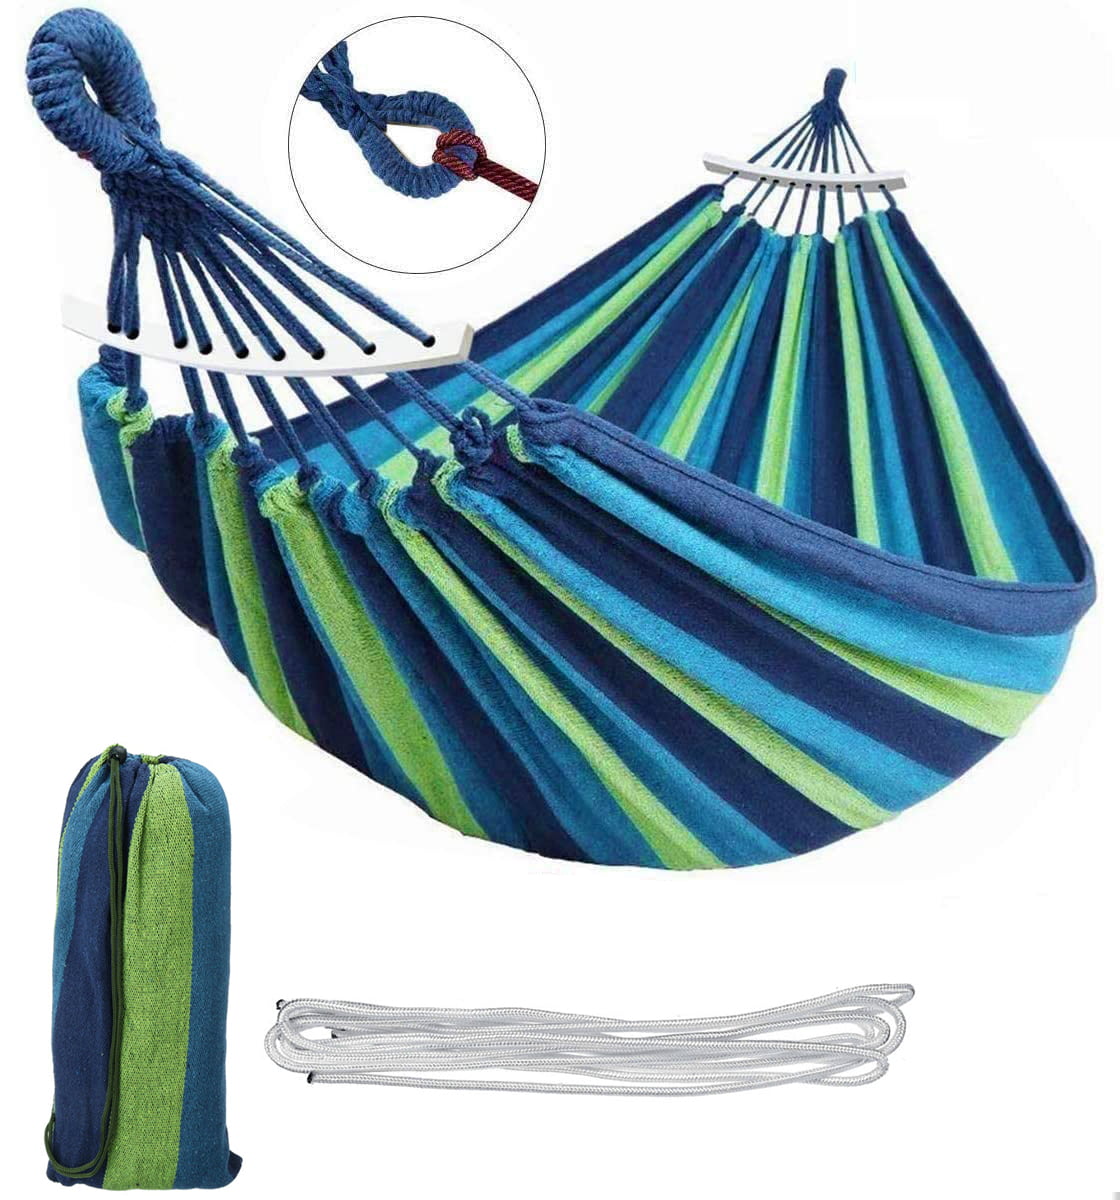 Double 2 Person Outdoor Garden Hammock Portable Camping Swing Hanging Fabric Bed 